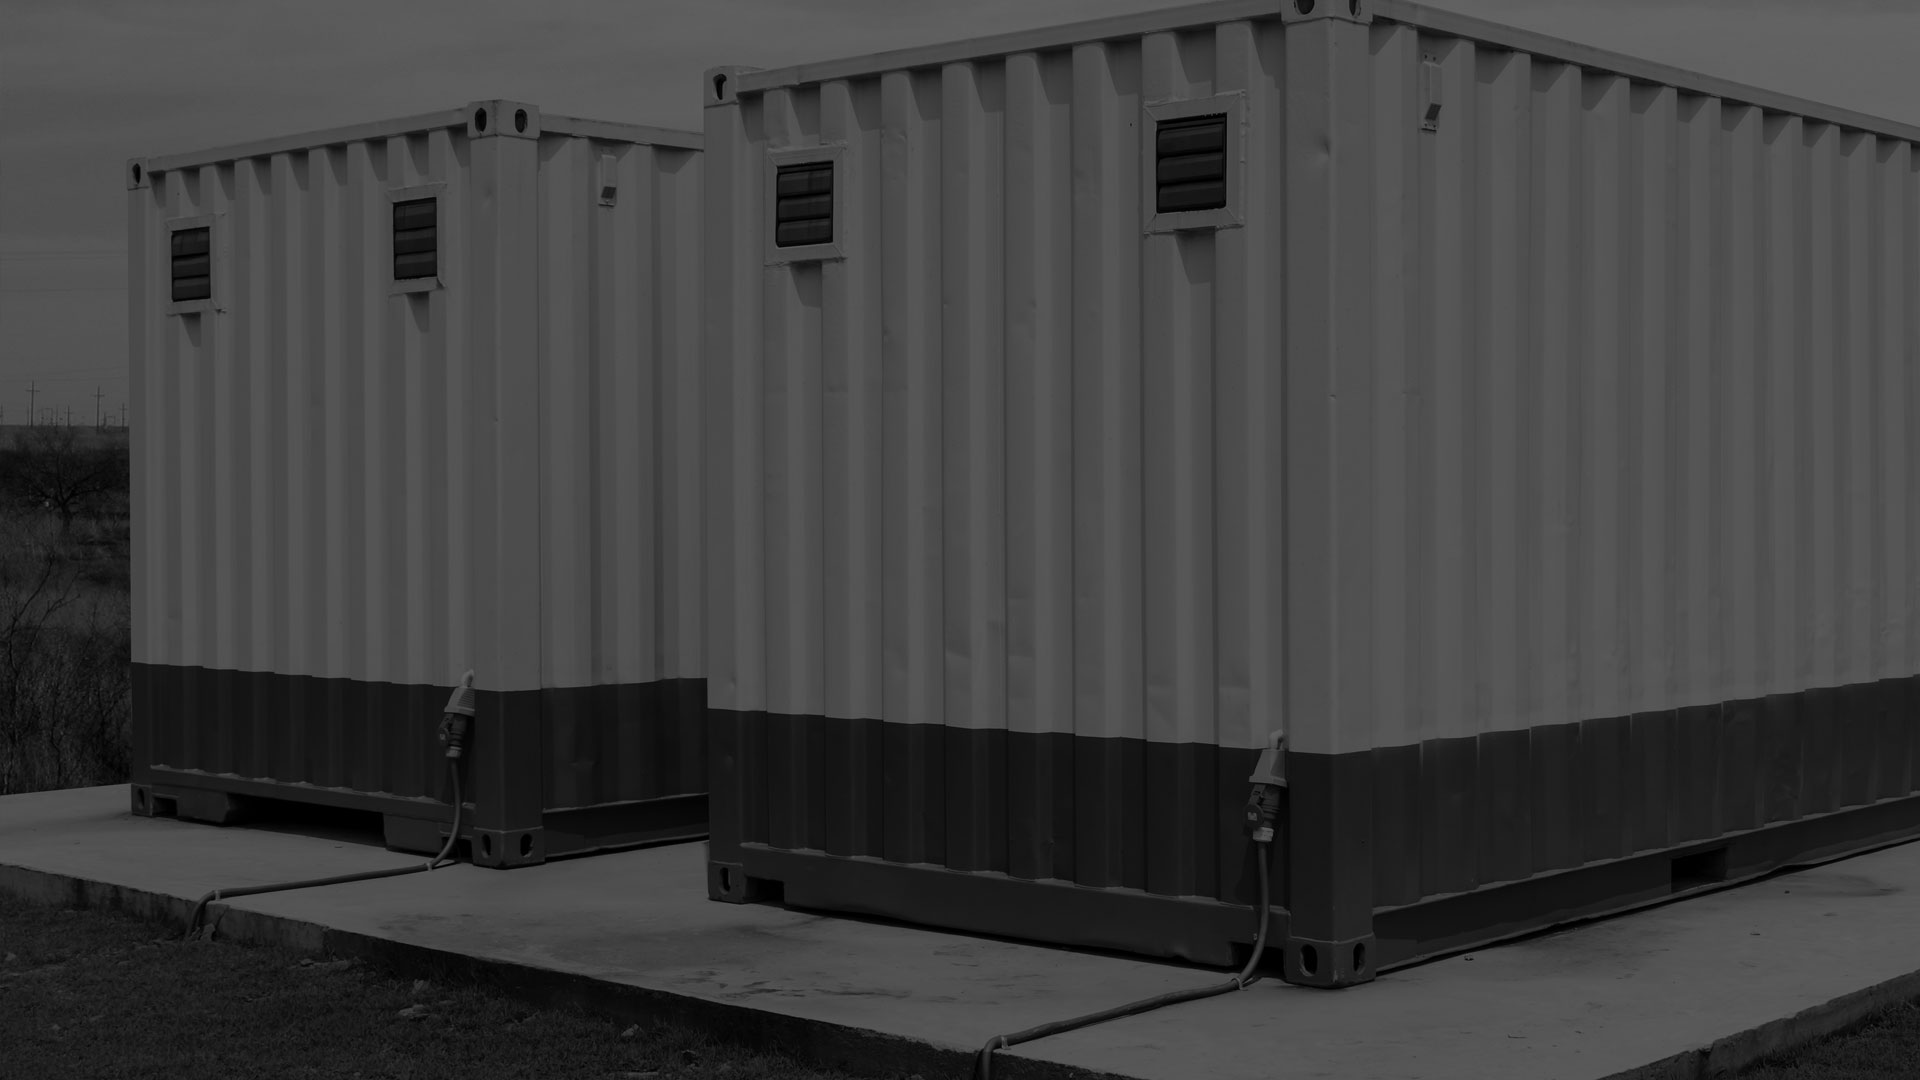 A darkened black and white image of container buildings.